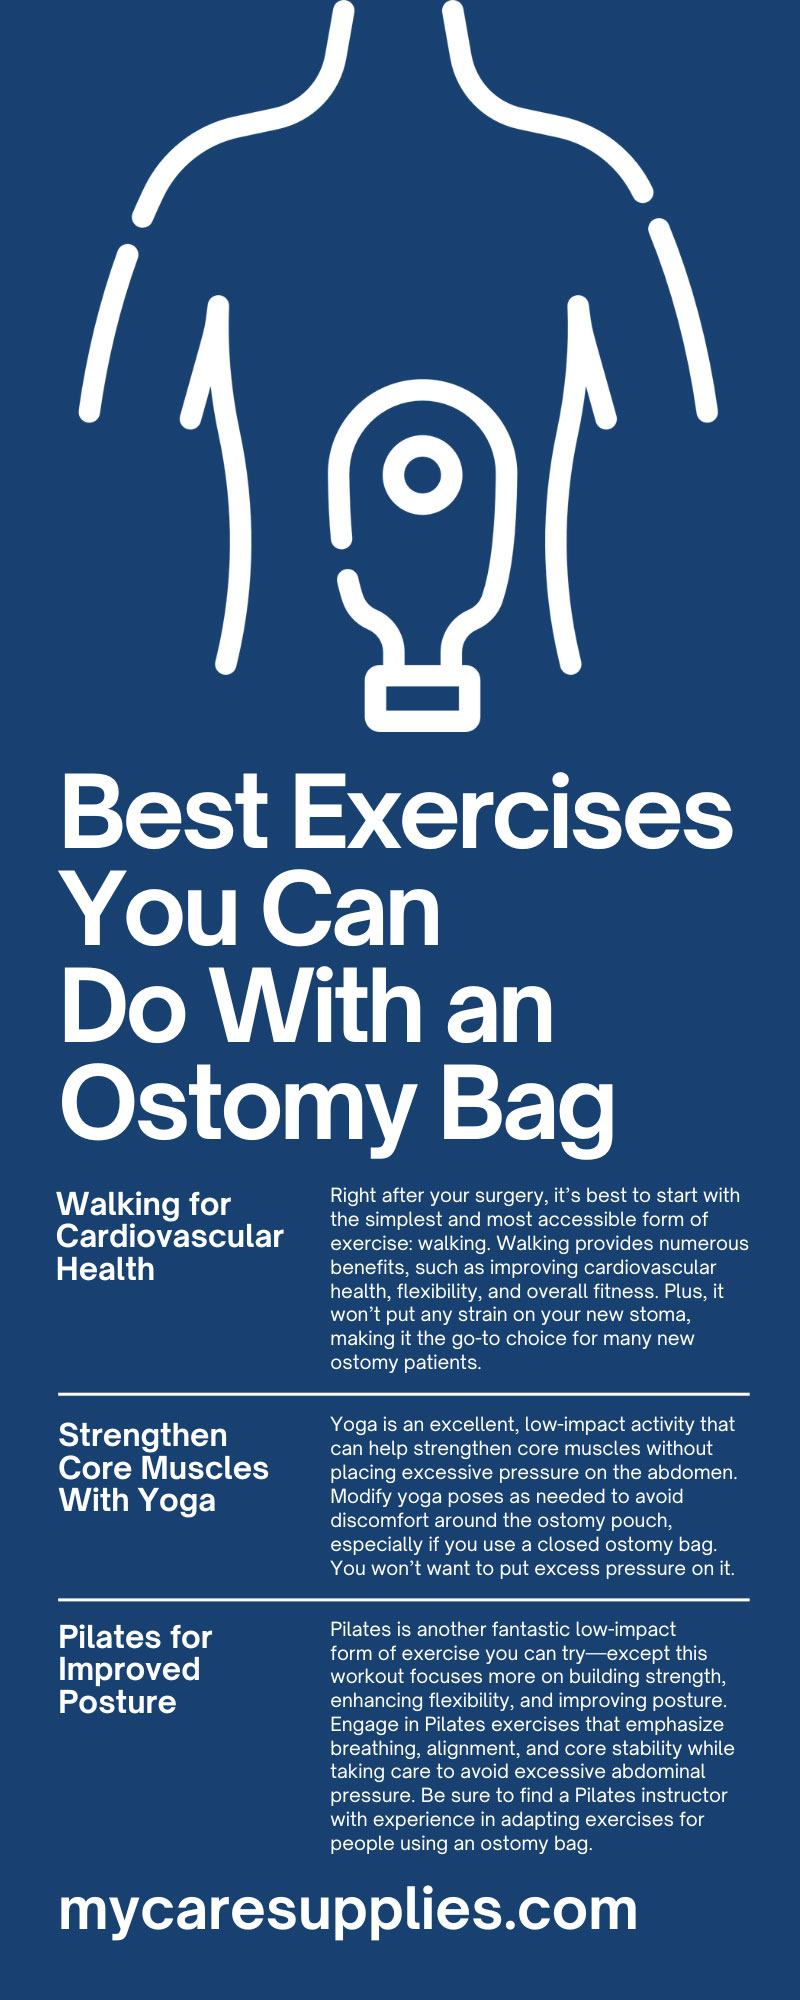 9 Best Exercises You Can Do With an Ostomy Bag